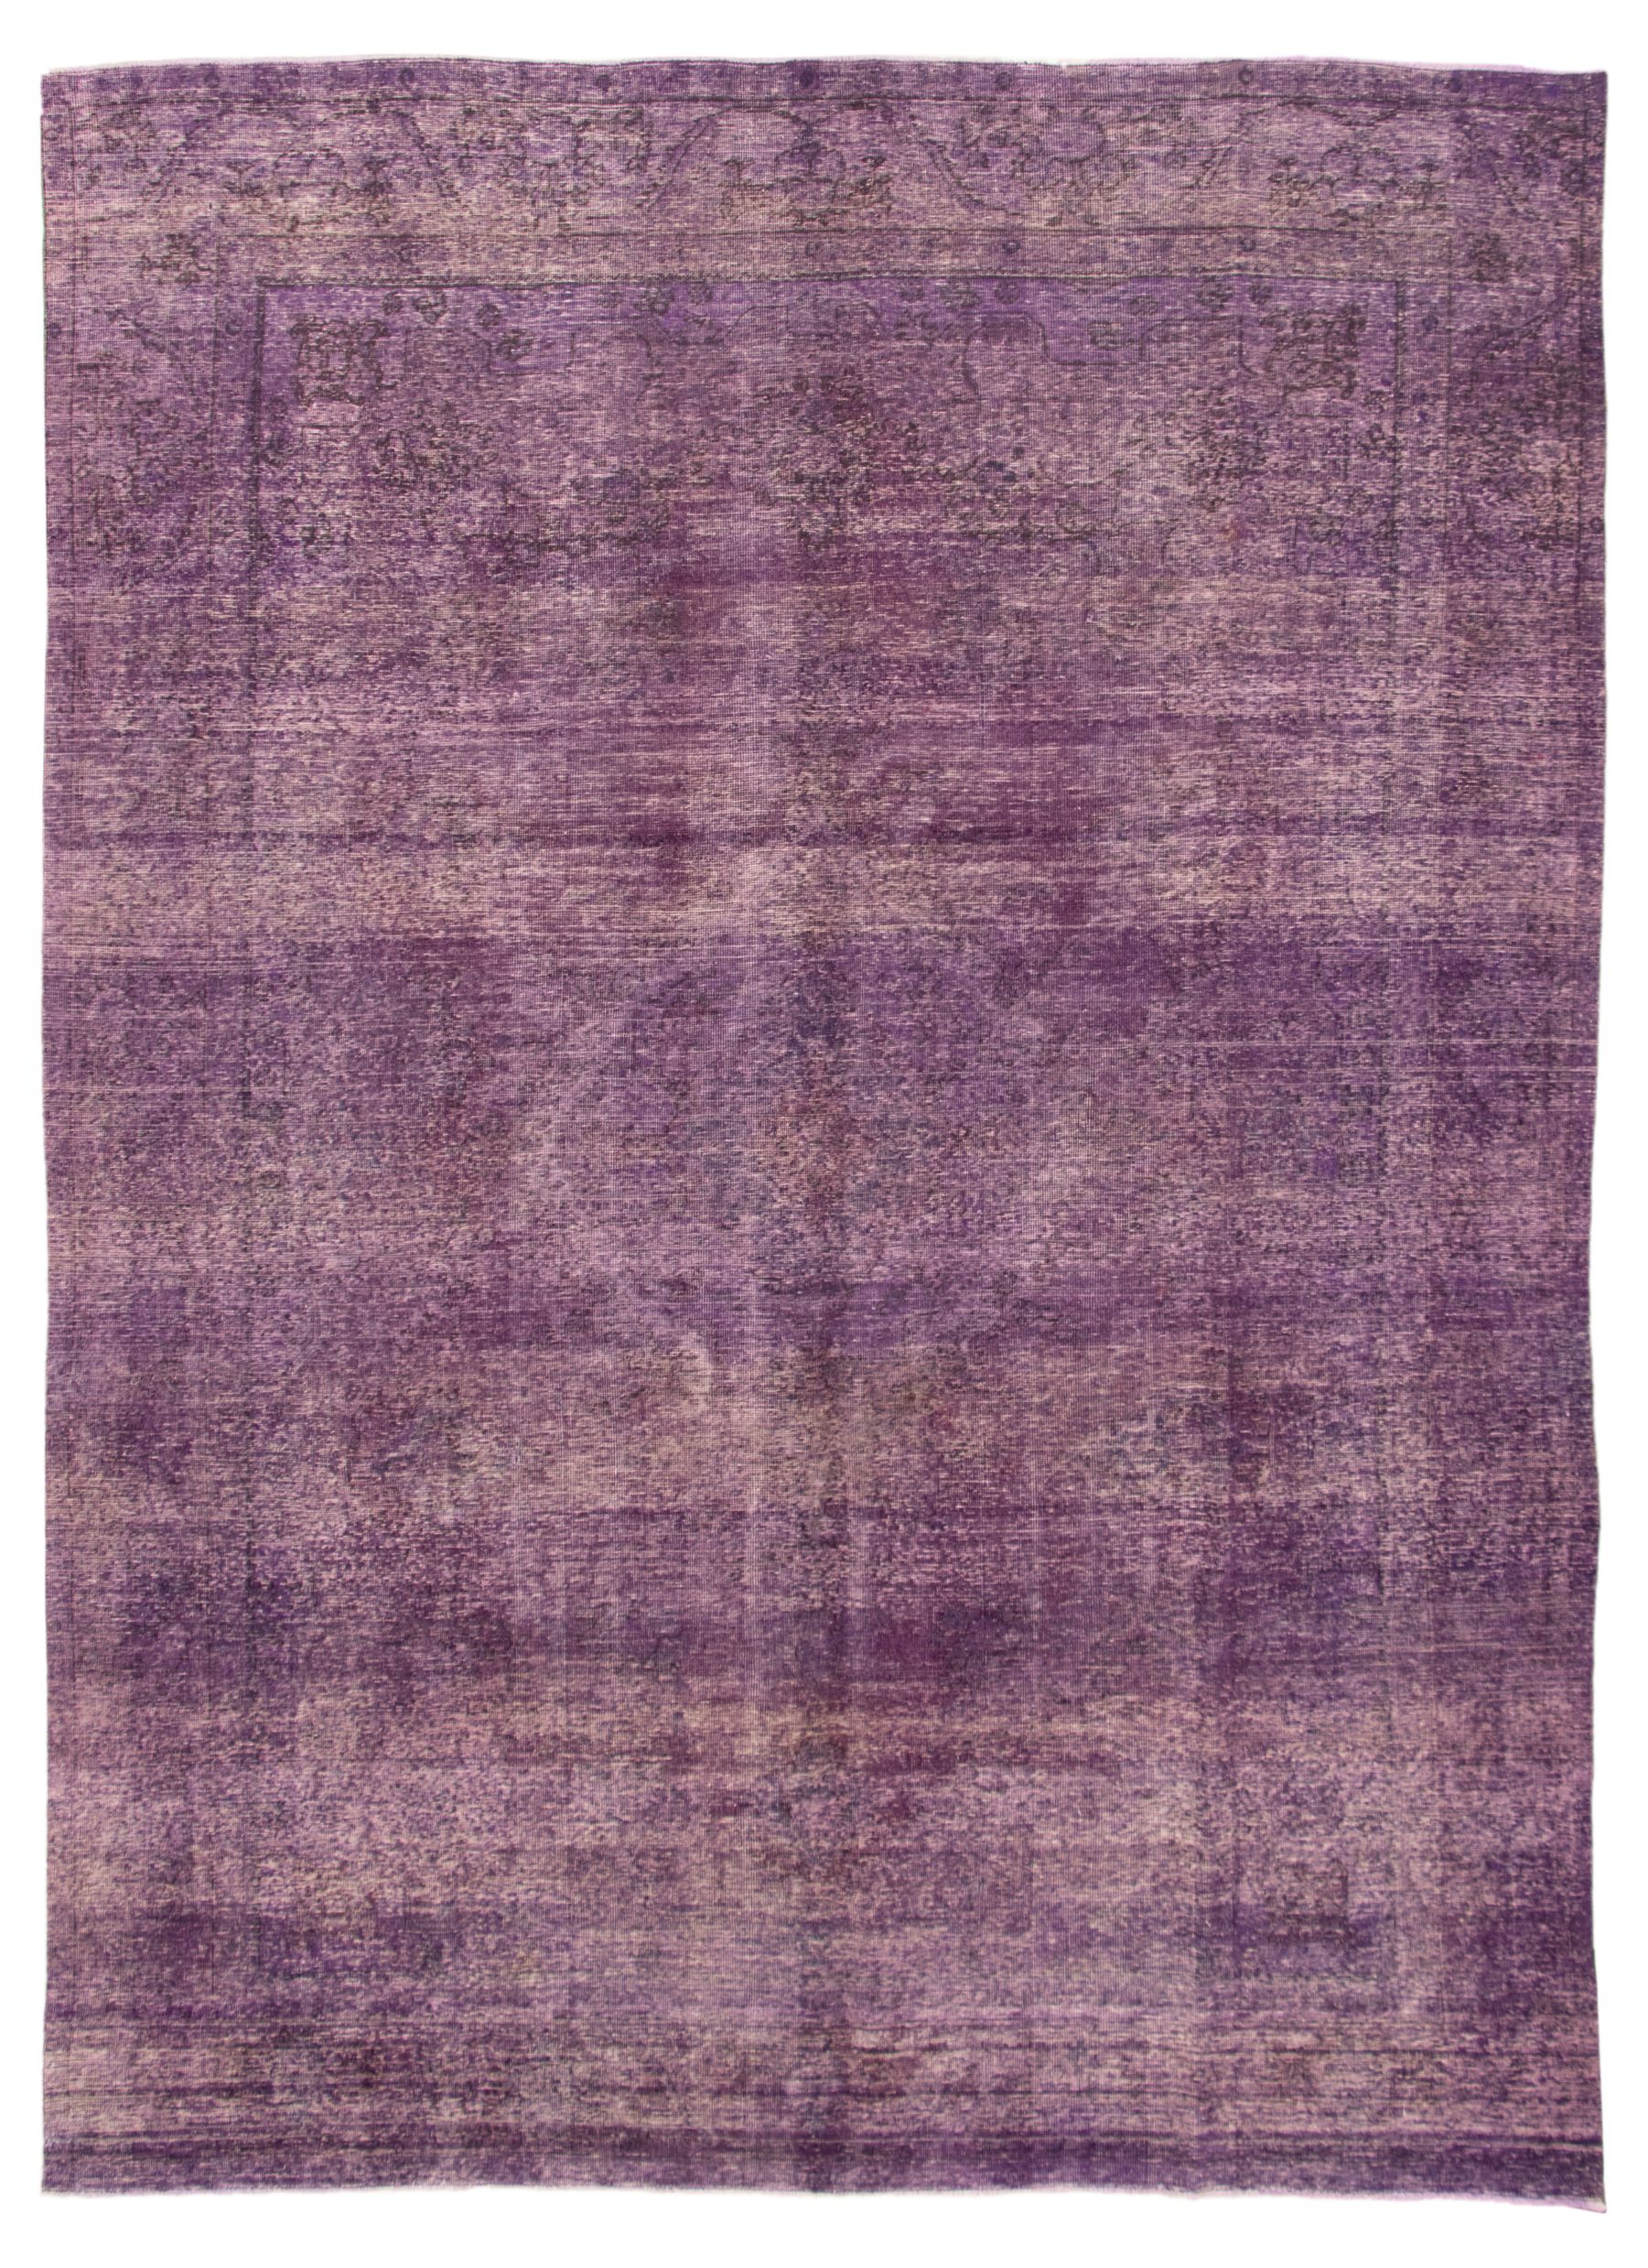 Hand-knotted Color Transition Purple Wool Rug 9'2" x 12'8" Size: 9'2" x 12'8"  